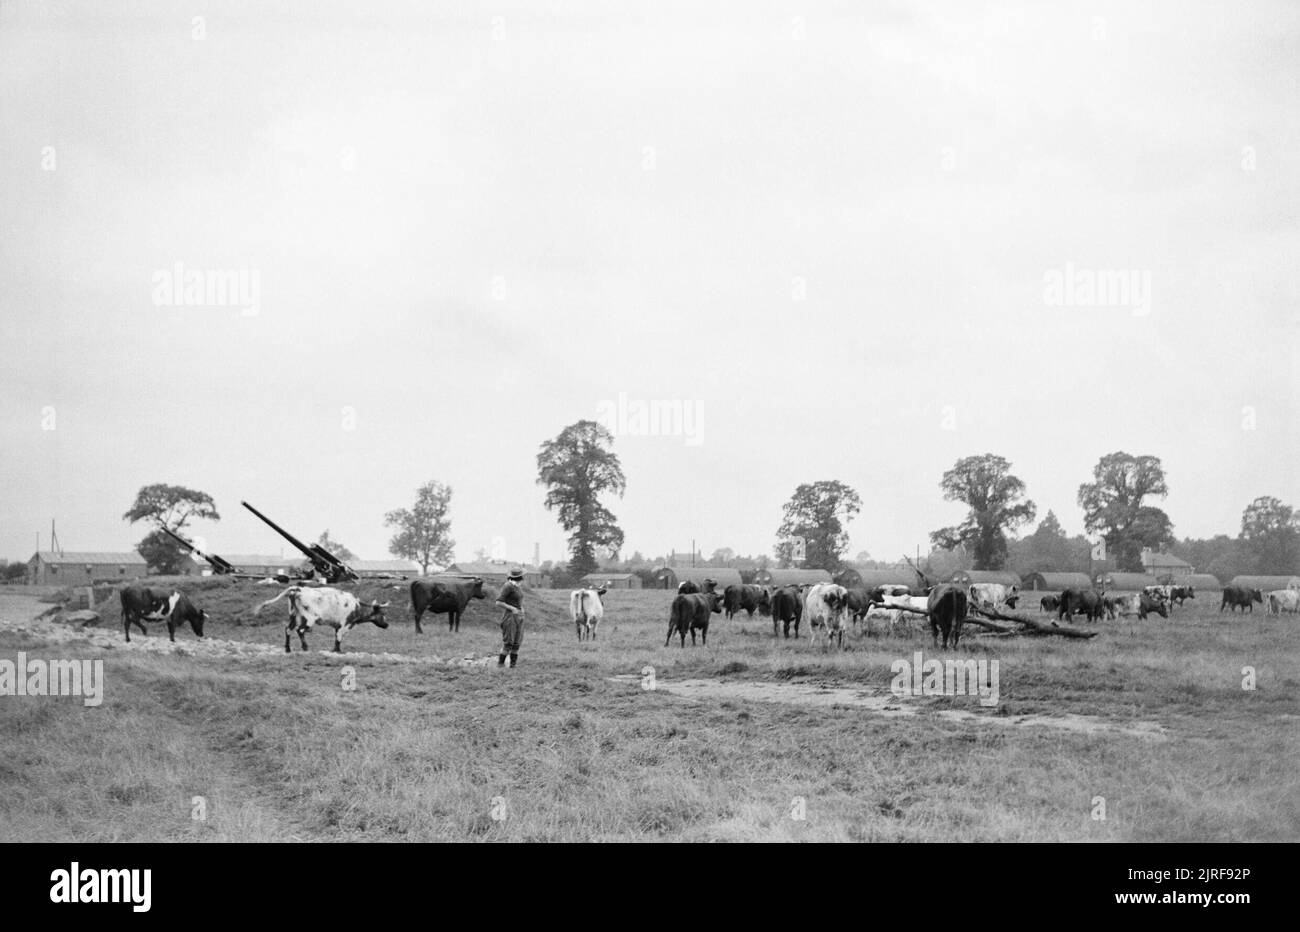 Agriculture and the Military- Everyday Life in the Countryside, Britain, C 1941 Cattle graze in a field in front of an anti-aircraft gun site, somewhere in England. In the background, the huts of the barracks for those working on the ack-ack site can just be seen. The cows are being looked after by a member of the Women's Land Army. Stock Photo